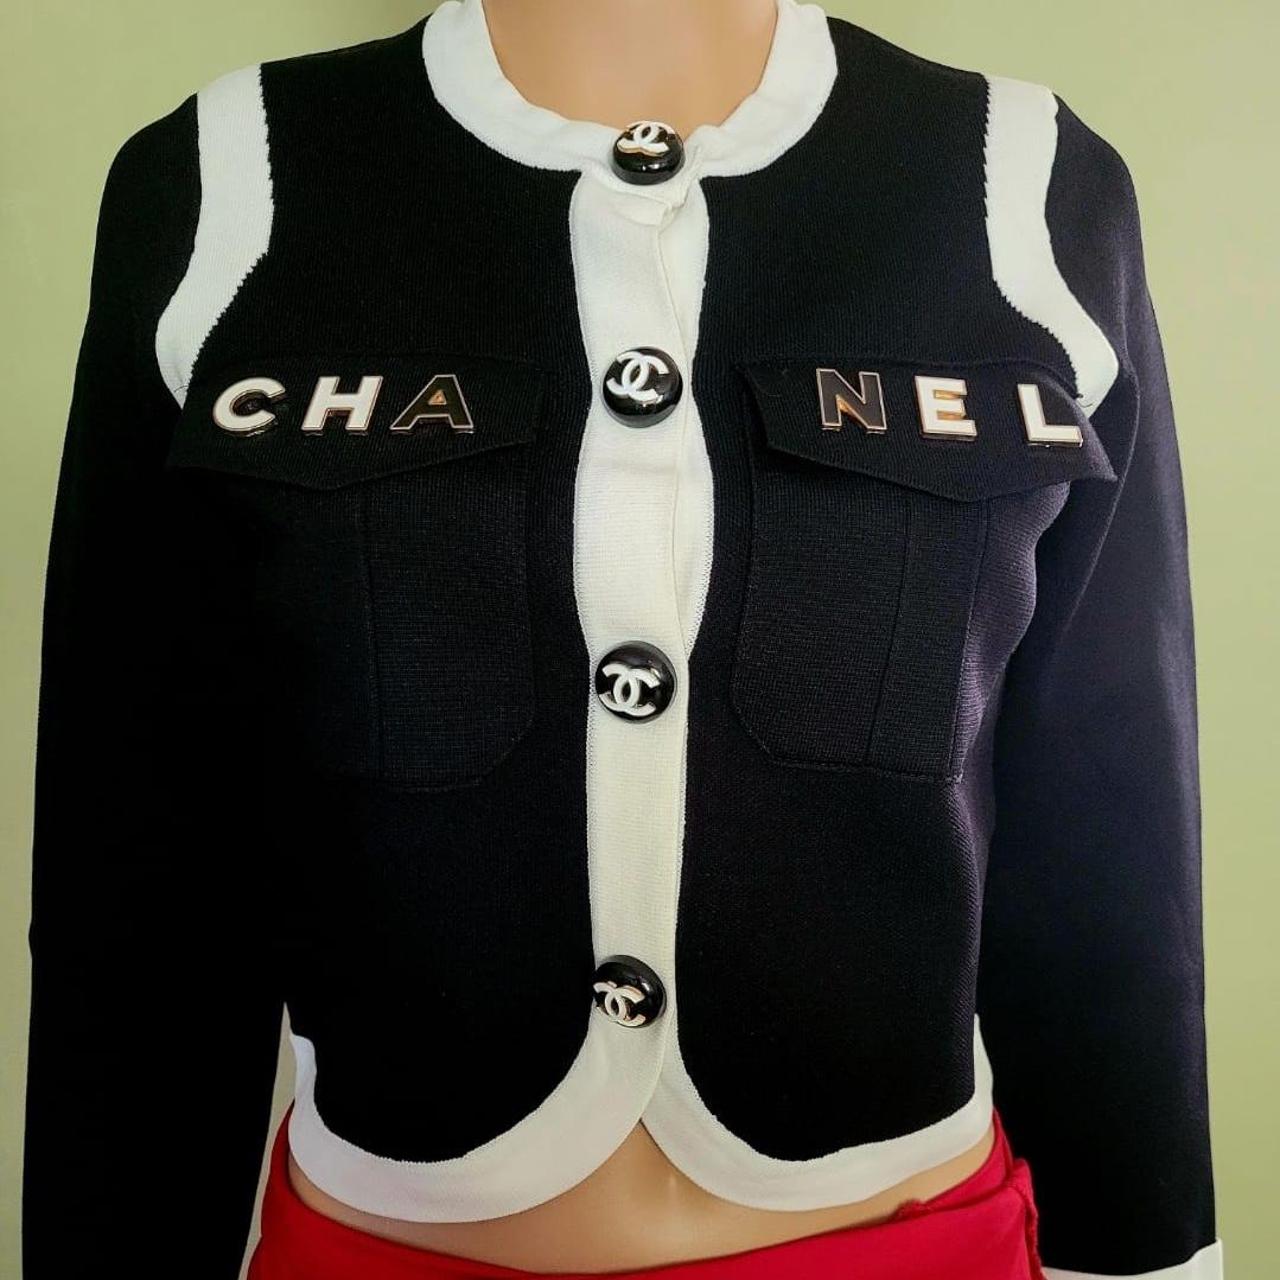 Chanel, Preloved, New & Secondhand Fashion